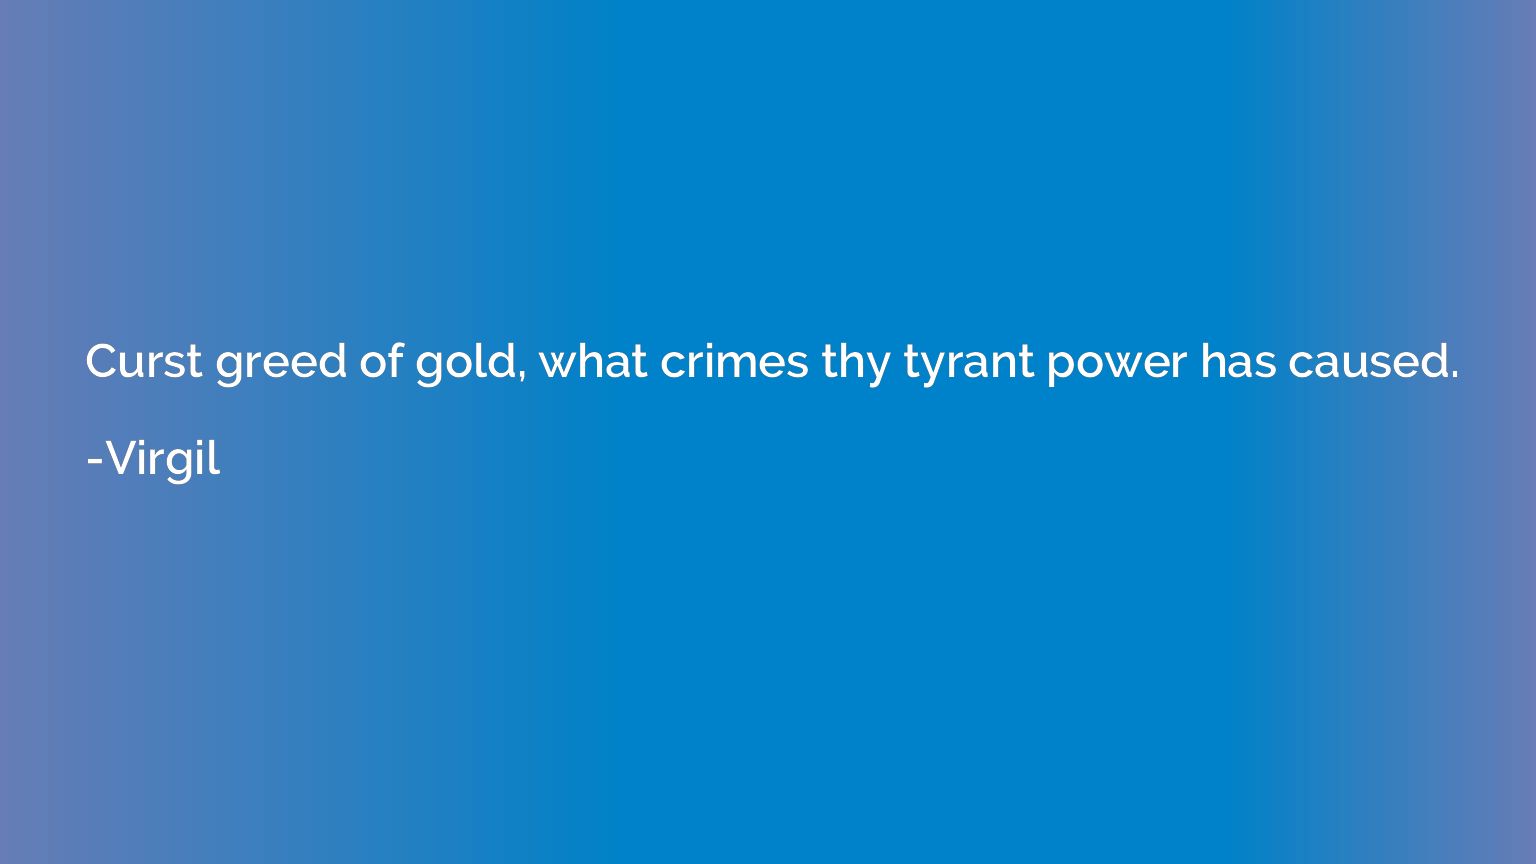 Curst greed of gold, what crimes thy tyrant power has caused